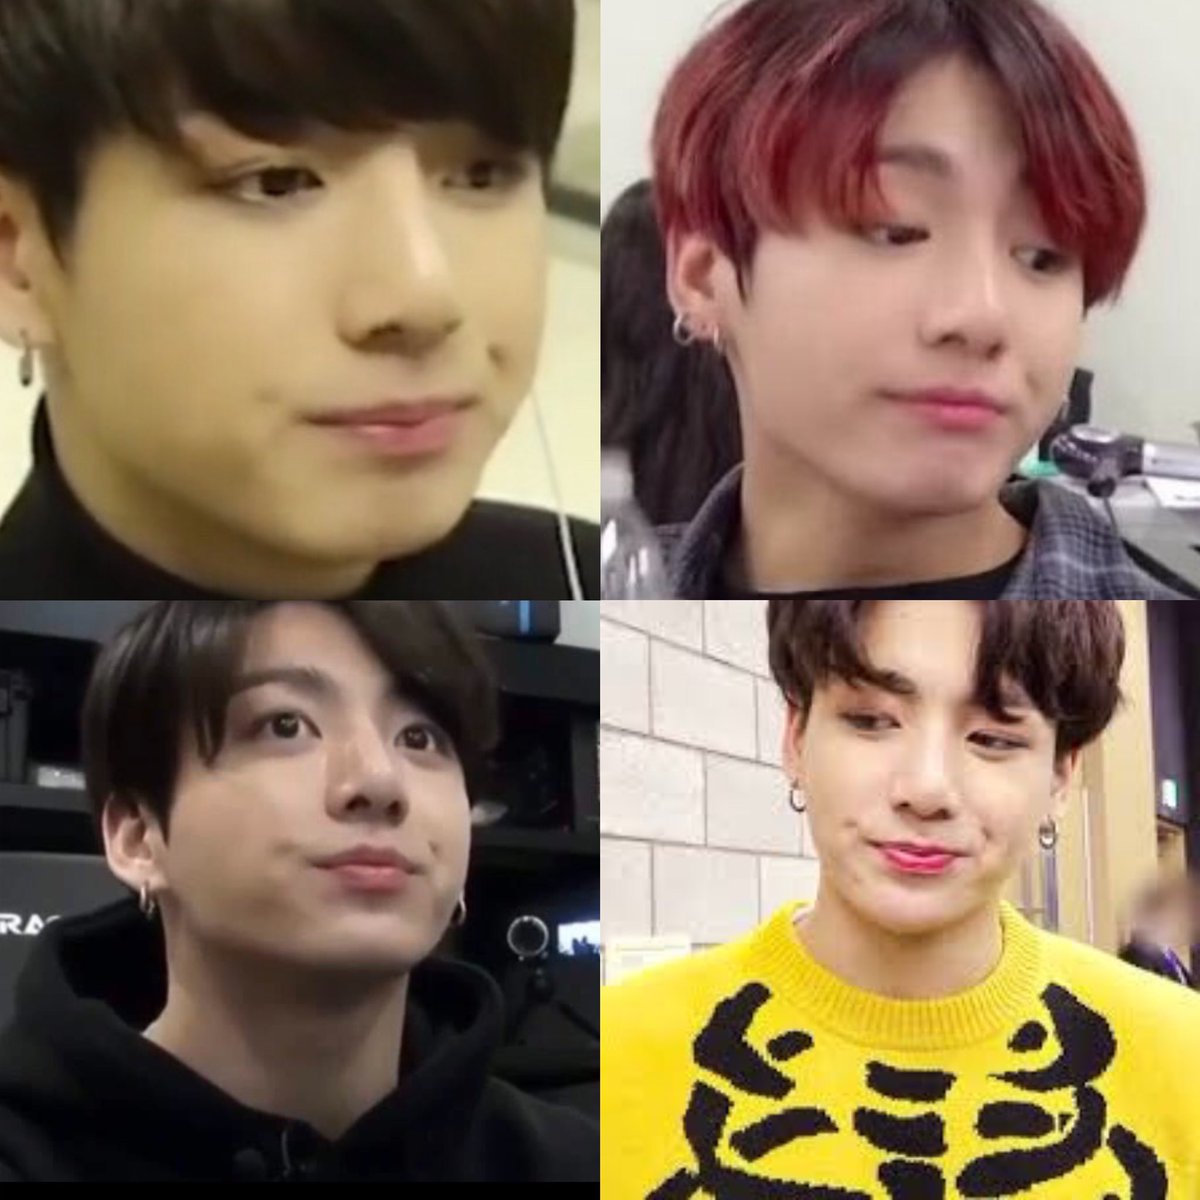 Jungkook’s little pout and side smile dimples 